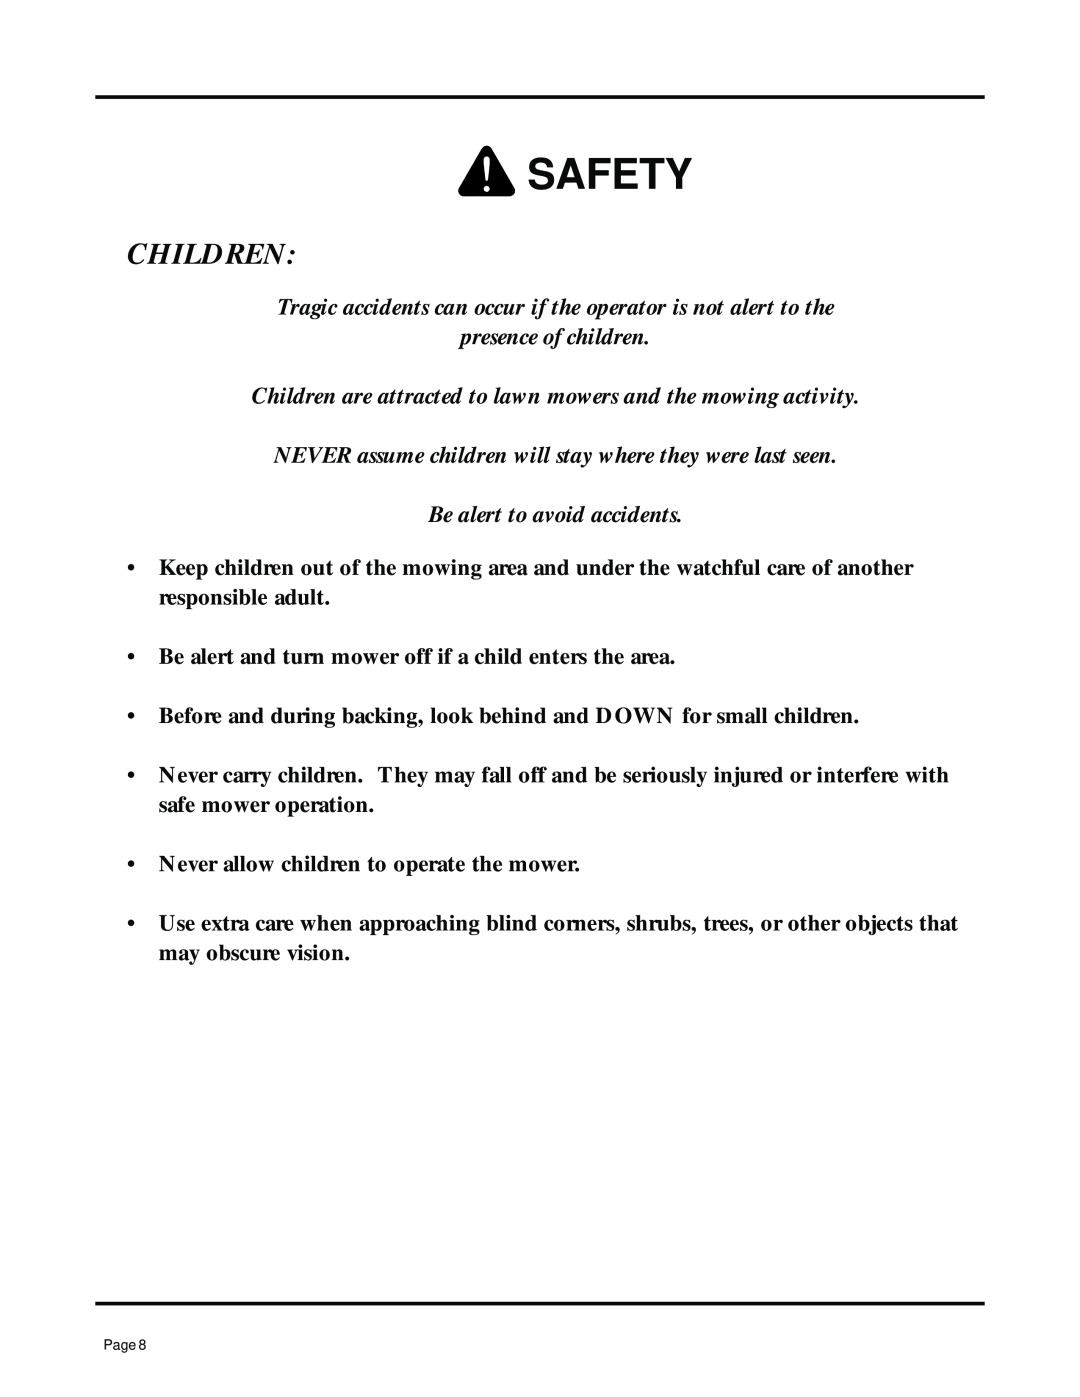 Dixon ZTR 7025 Children, Tragic accidents can occur if the operator is not alert to the, presence of children, Safety 